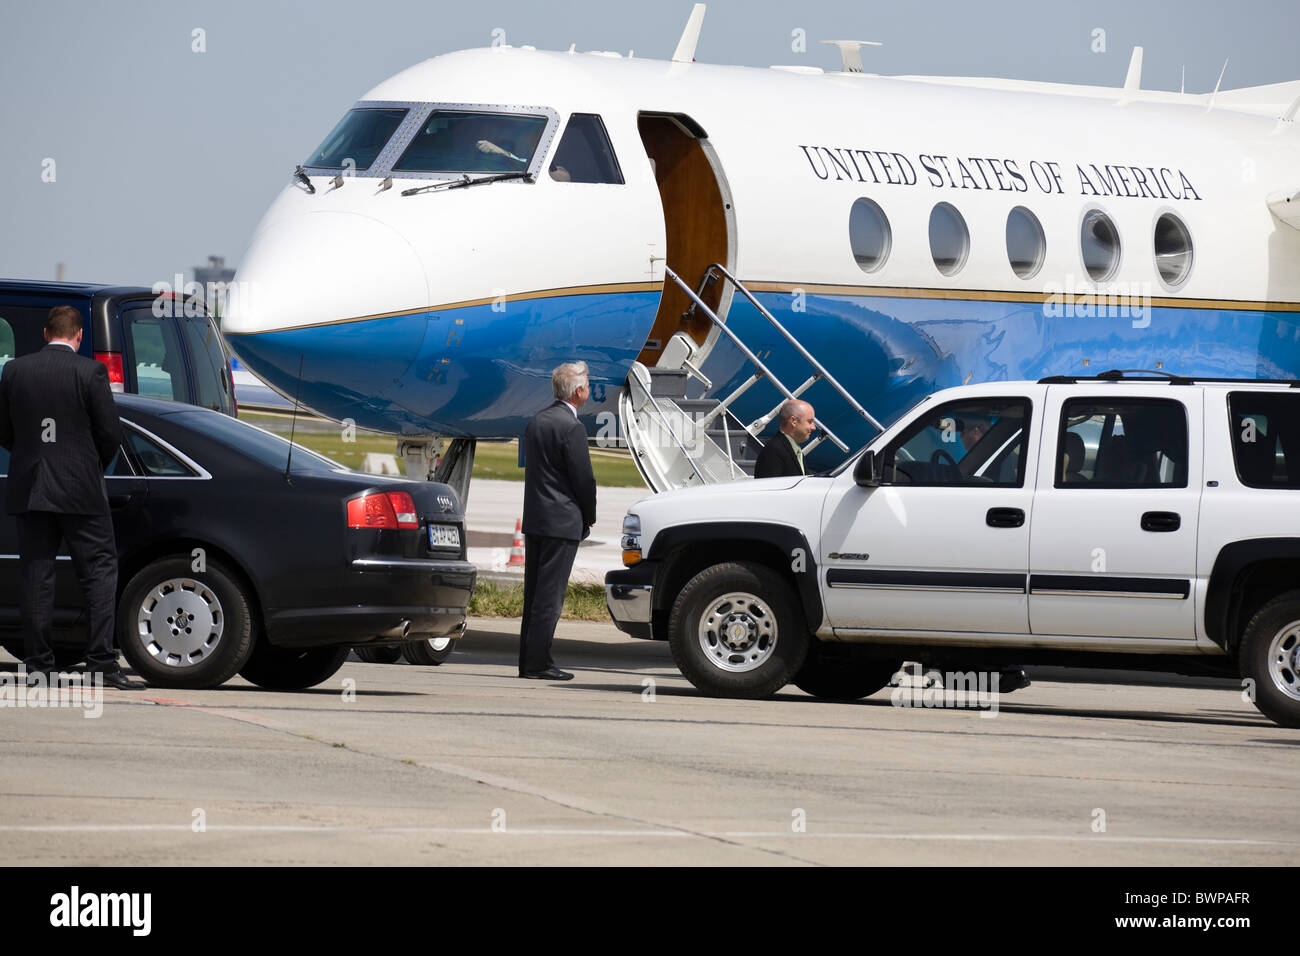 Visit of VIPs, bodyguard at the work, US Air Force jet Aerospace C-37A Gulfstream and cars escort waiting for a VIP at airport Stock Photo